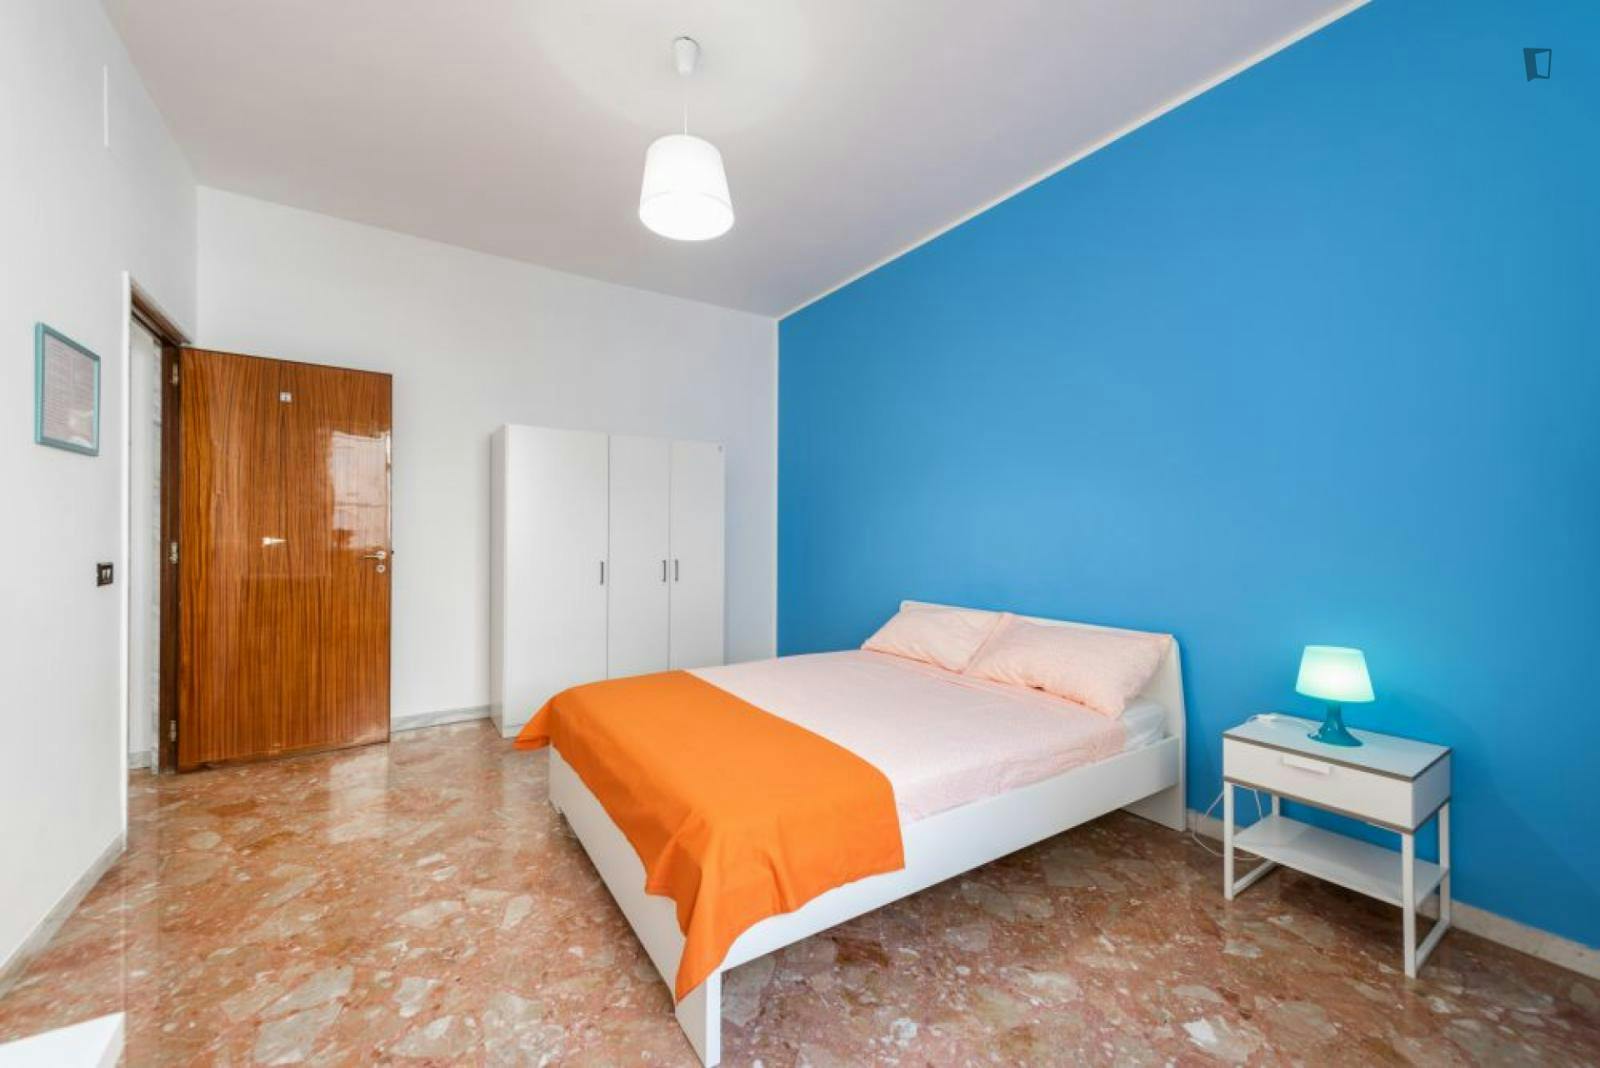 Attractive double bedroom near the Bari Centrale transport station